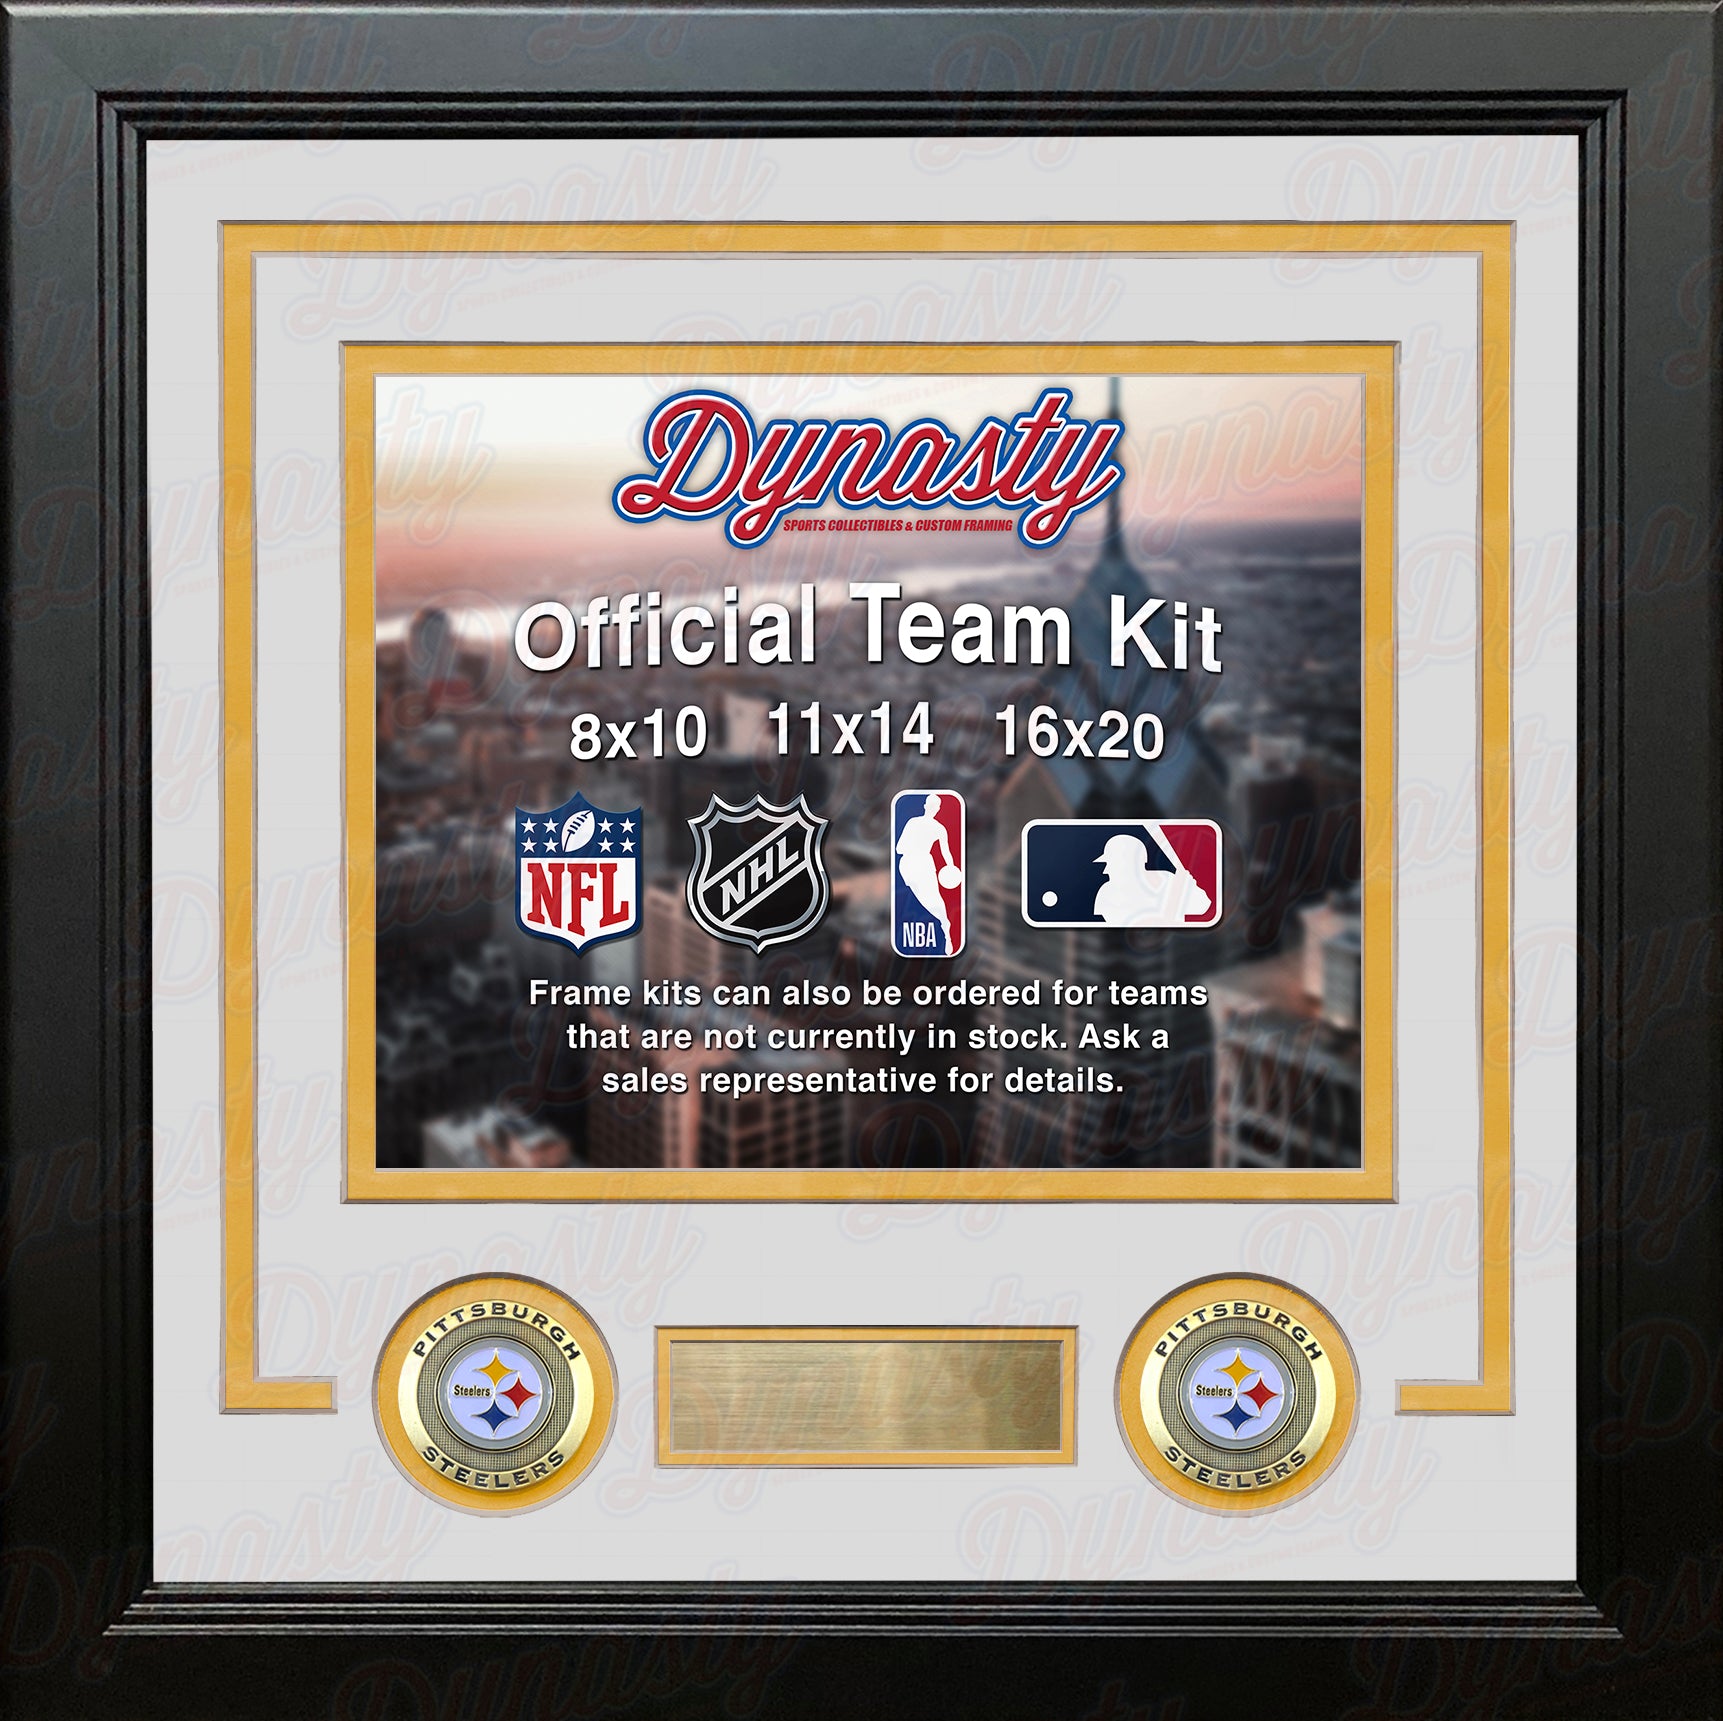 NFL Football Photo Picture Frame Kit - Pittsburgh Steelers (White Matting, Yellow Trim) - Dynasty Sports & Framing 